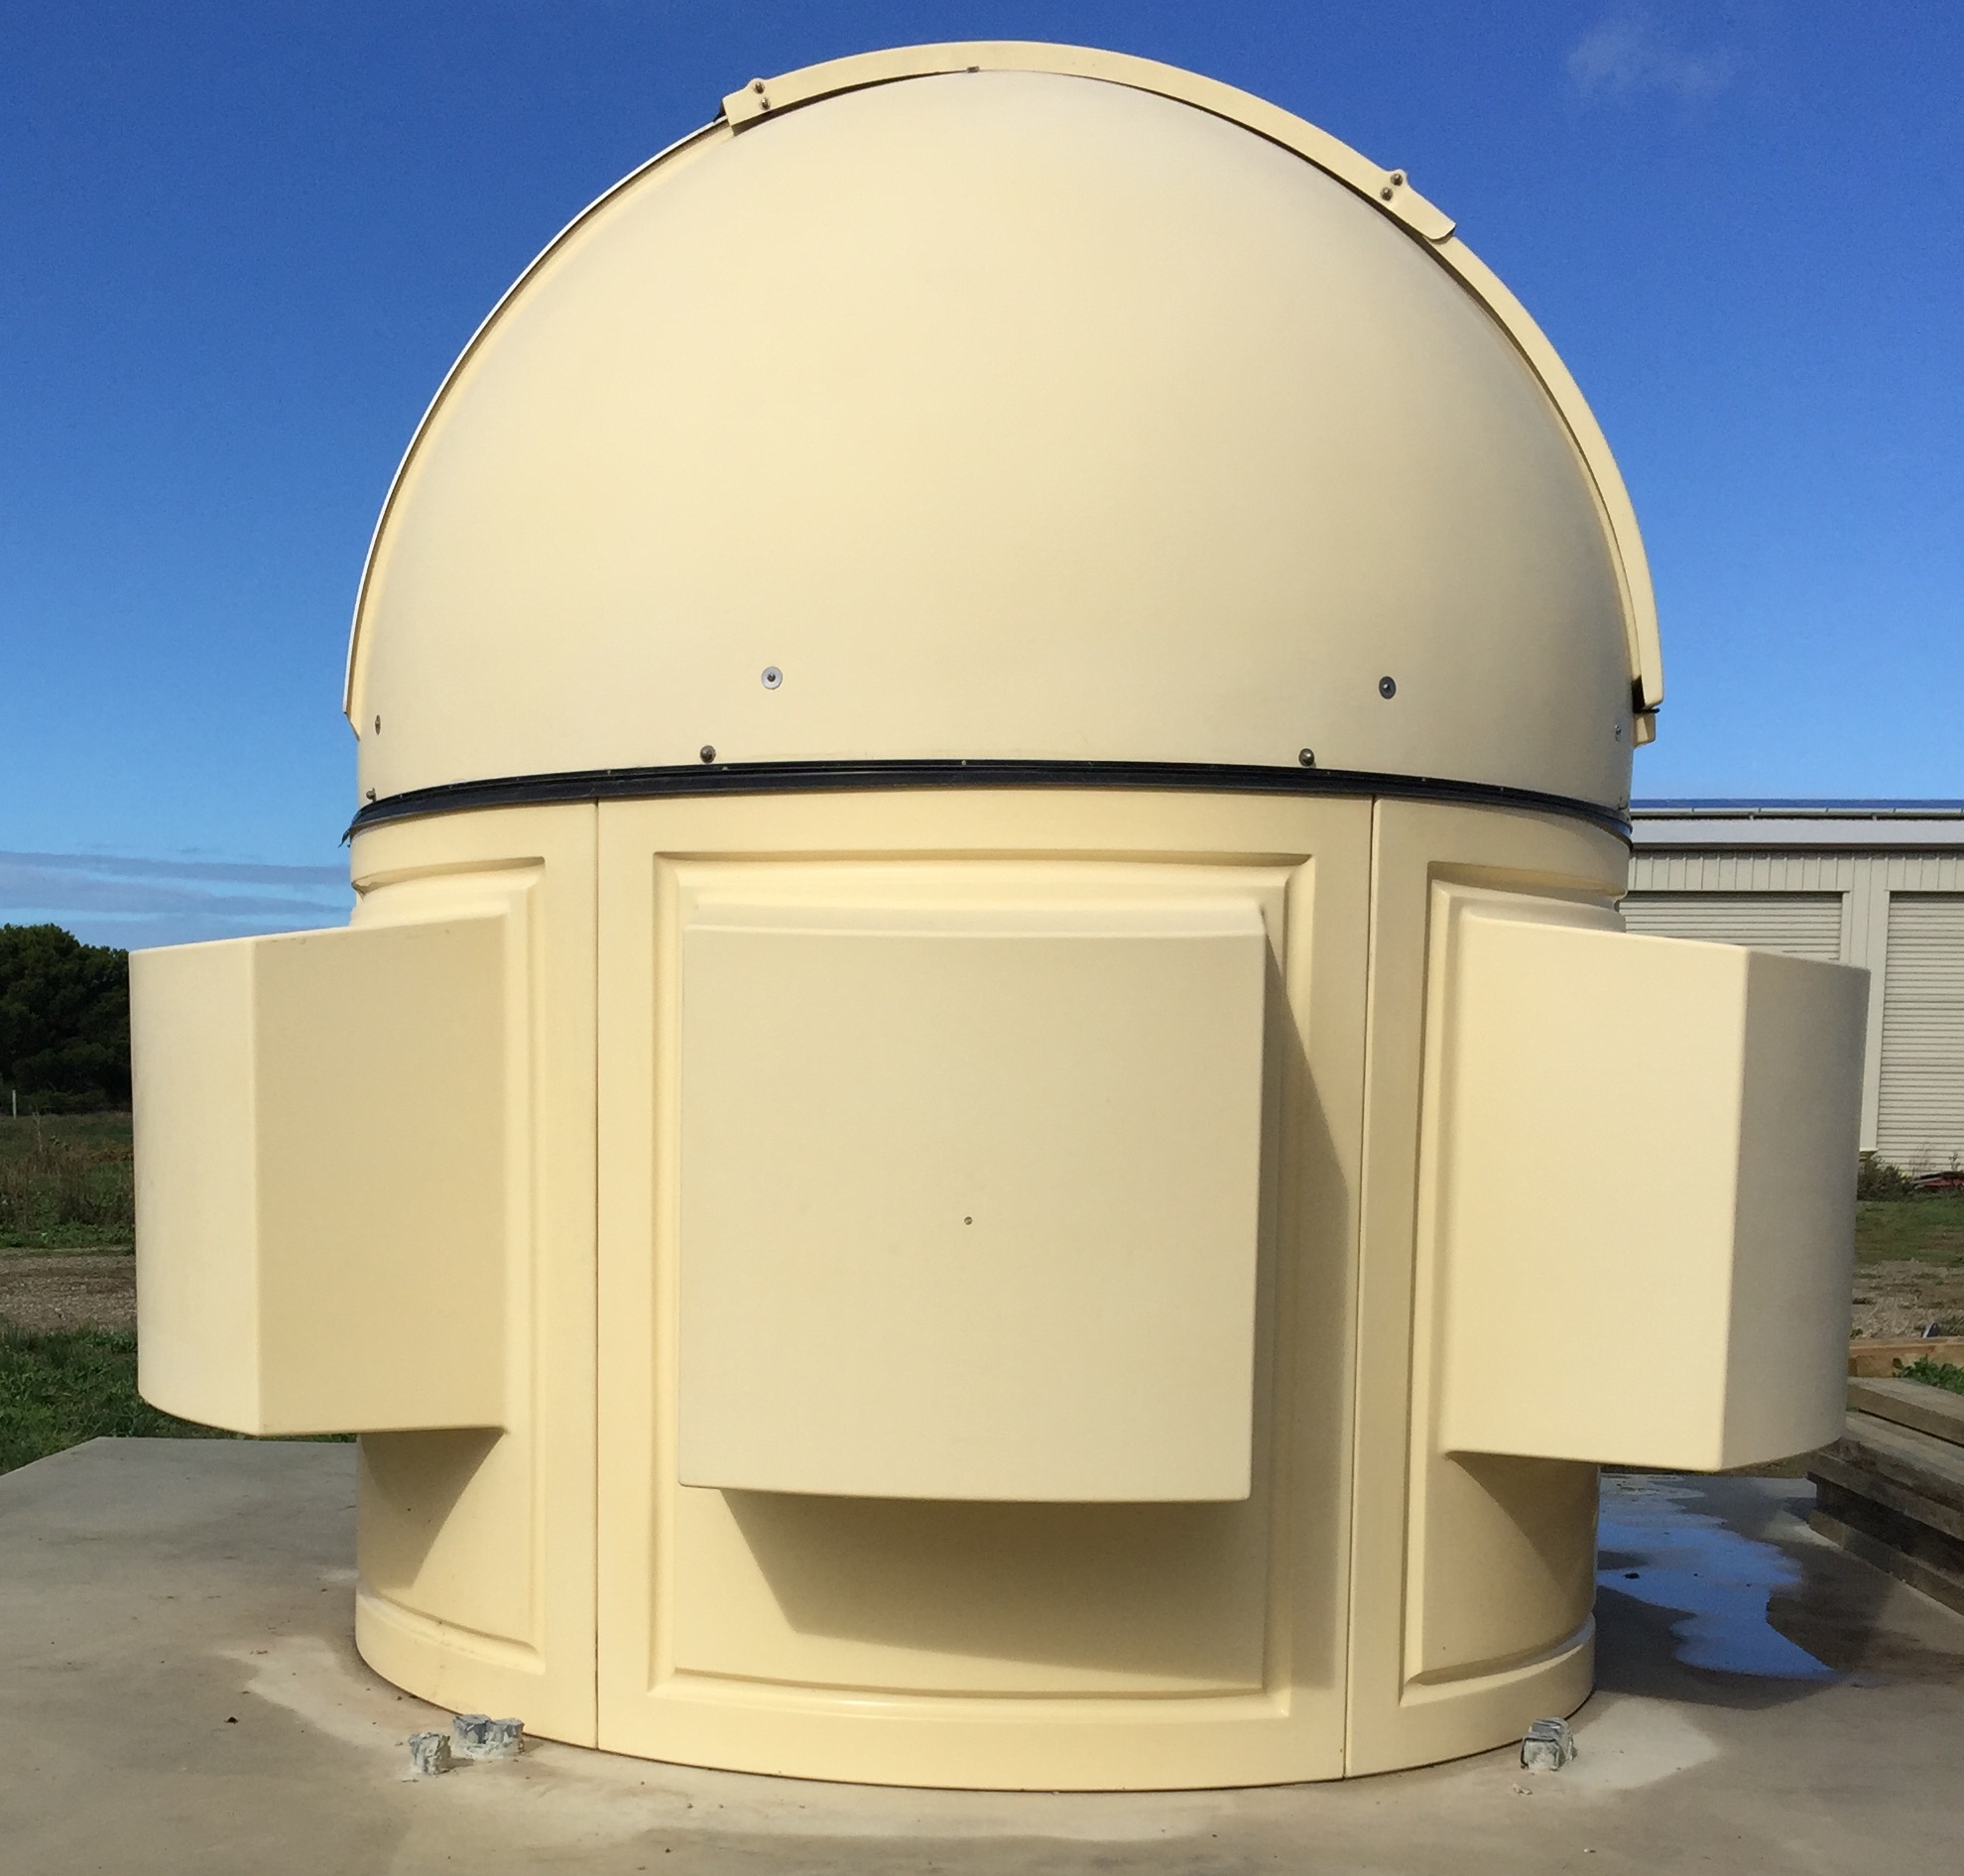 astronomy observation dome